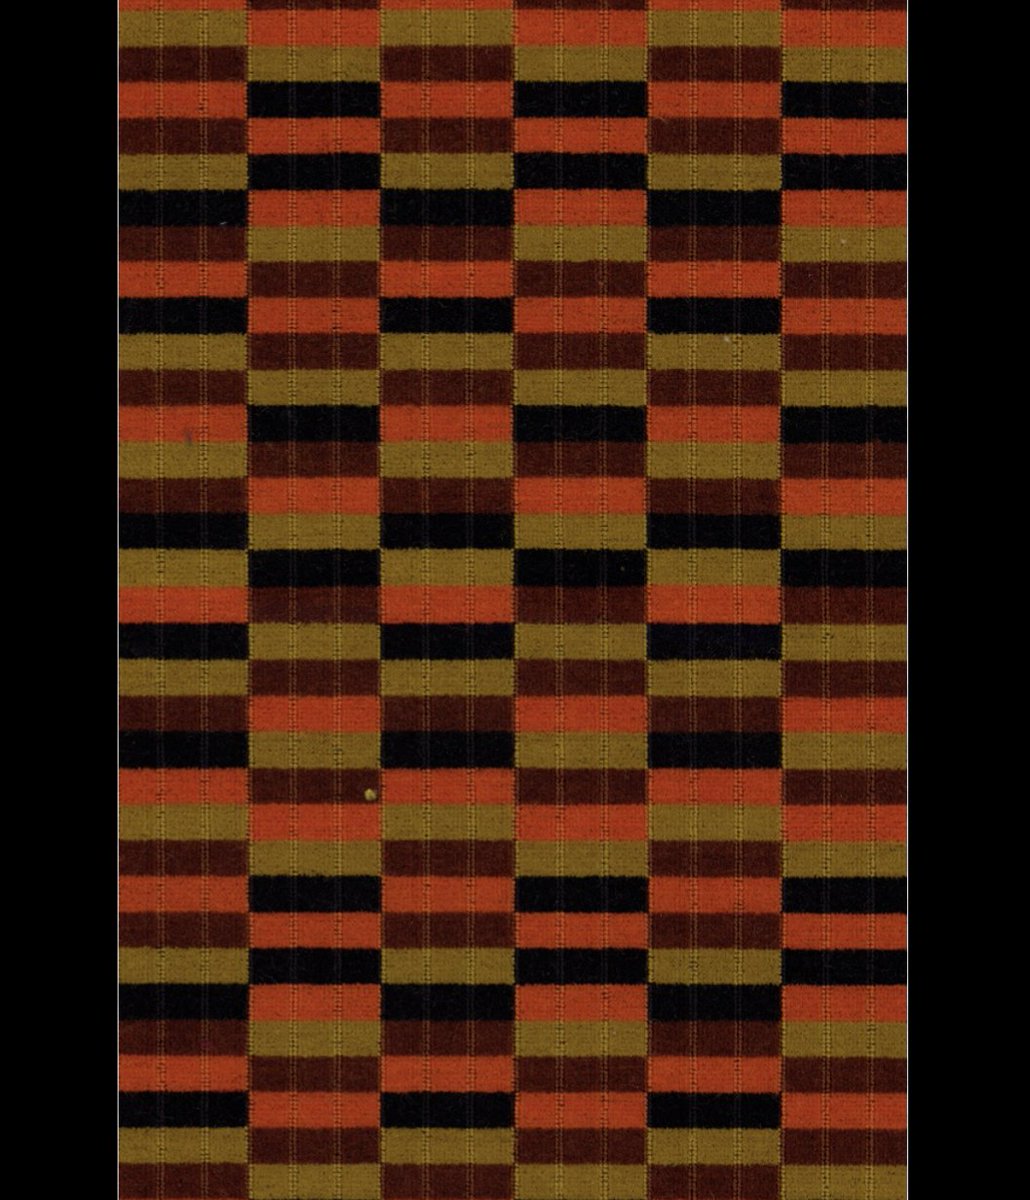 Sometimes I look at the London Bus seat covers, and imagine I'm playing an Atari 2600 game